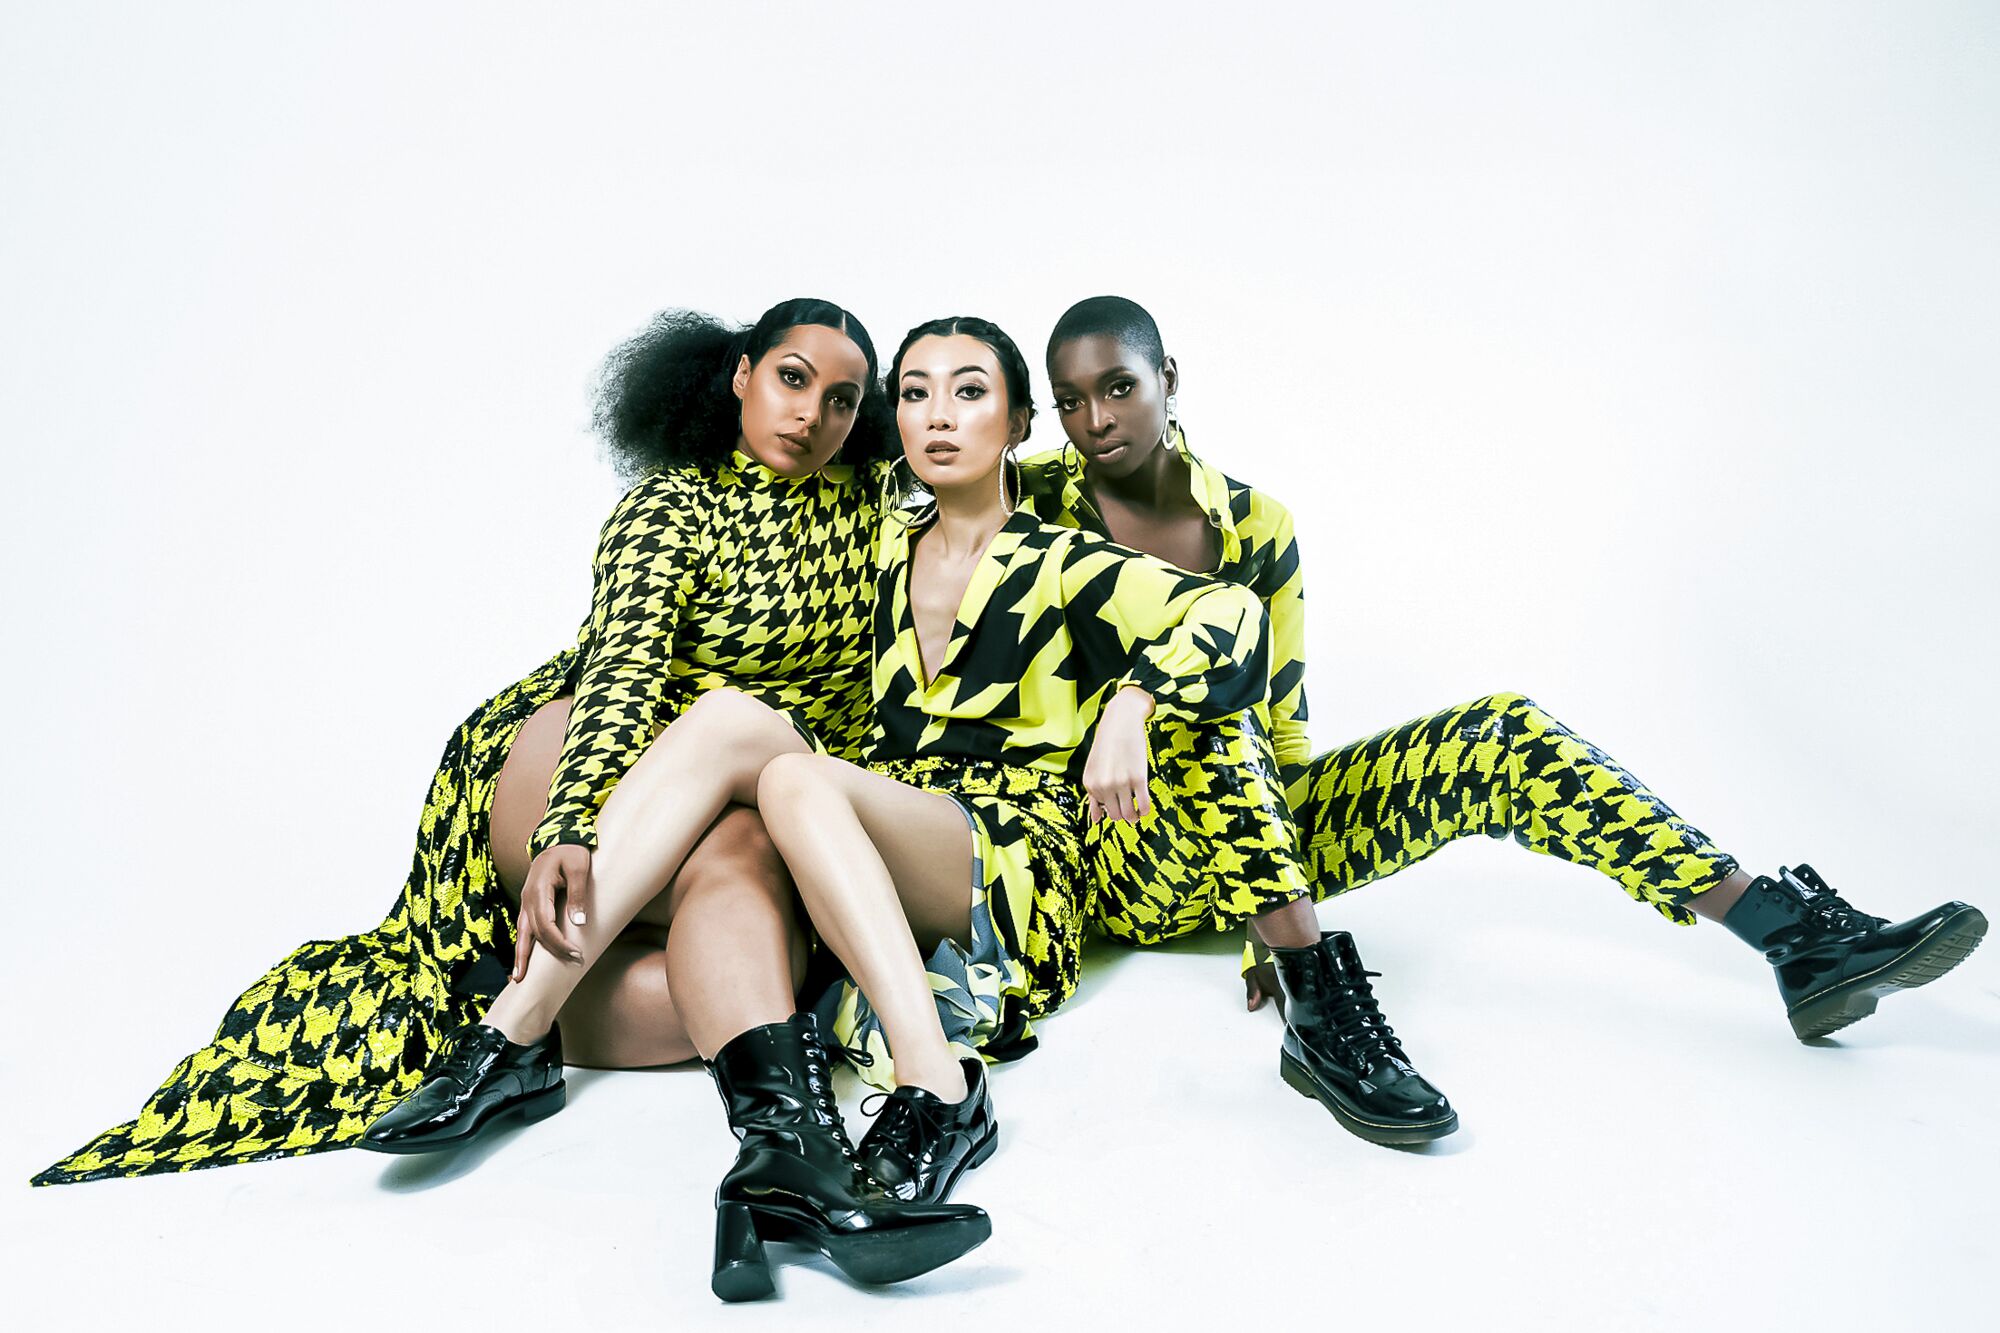 Three women wearing clothes covered in houndstooth checks.